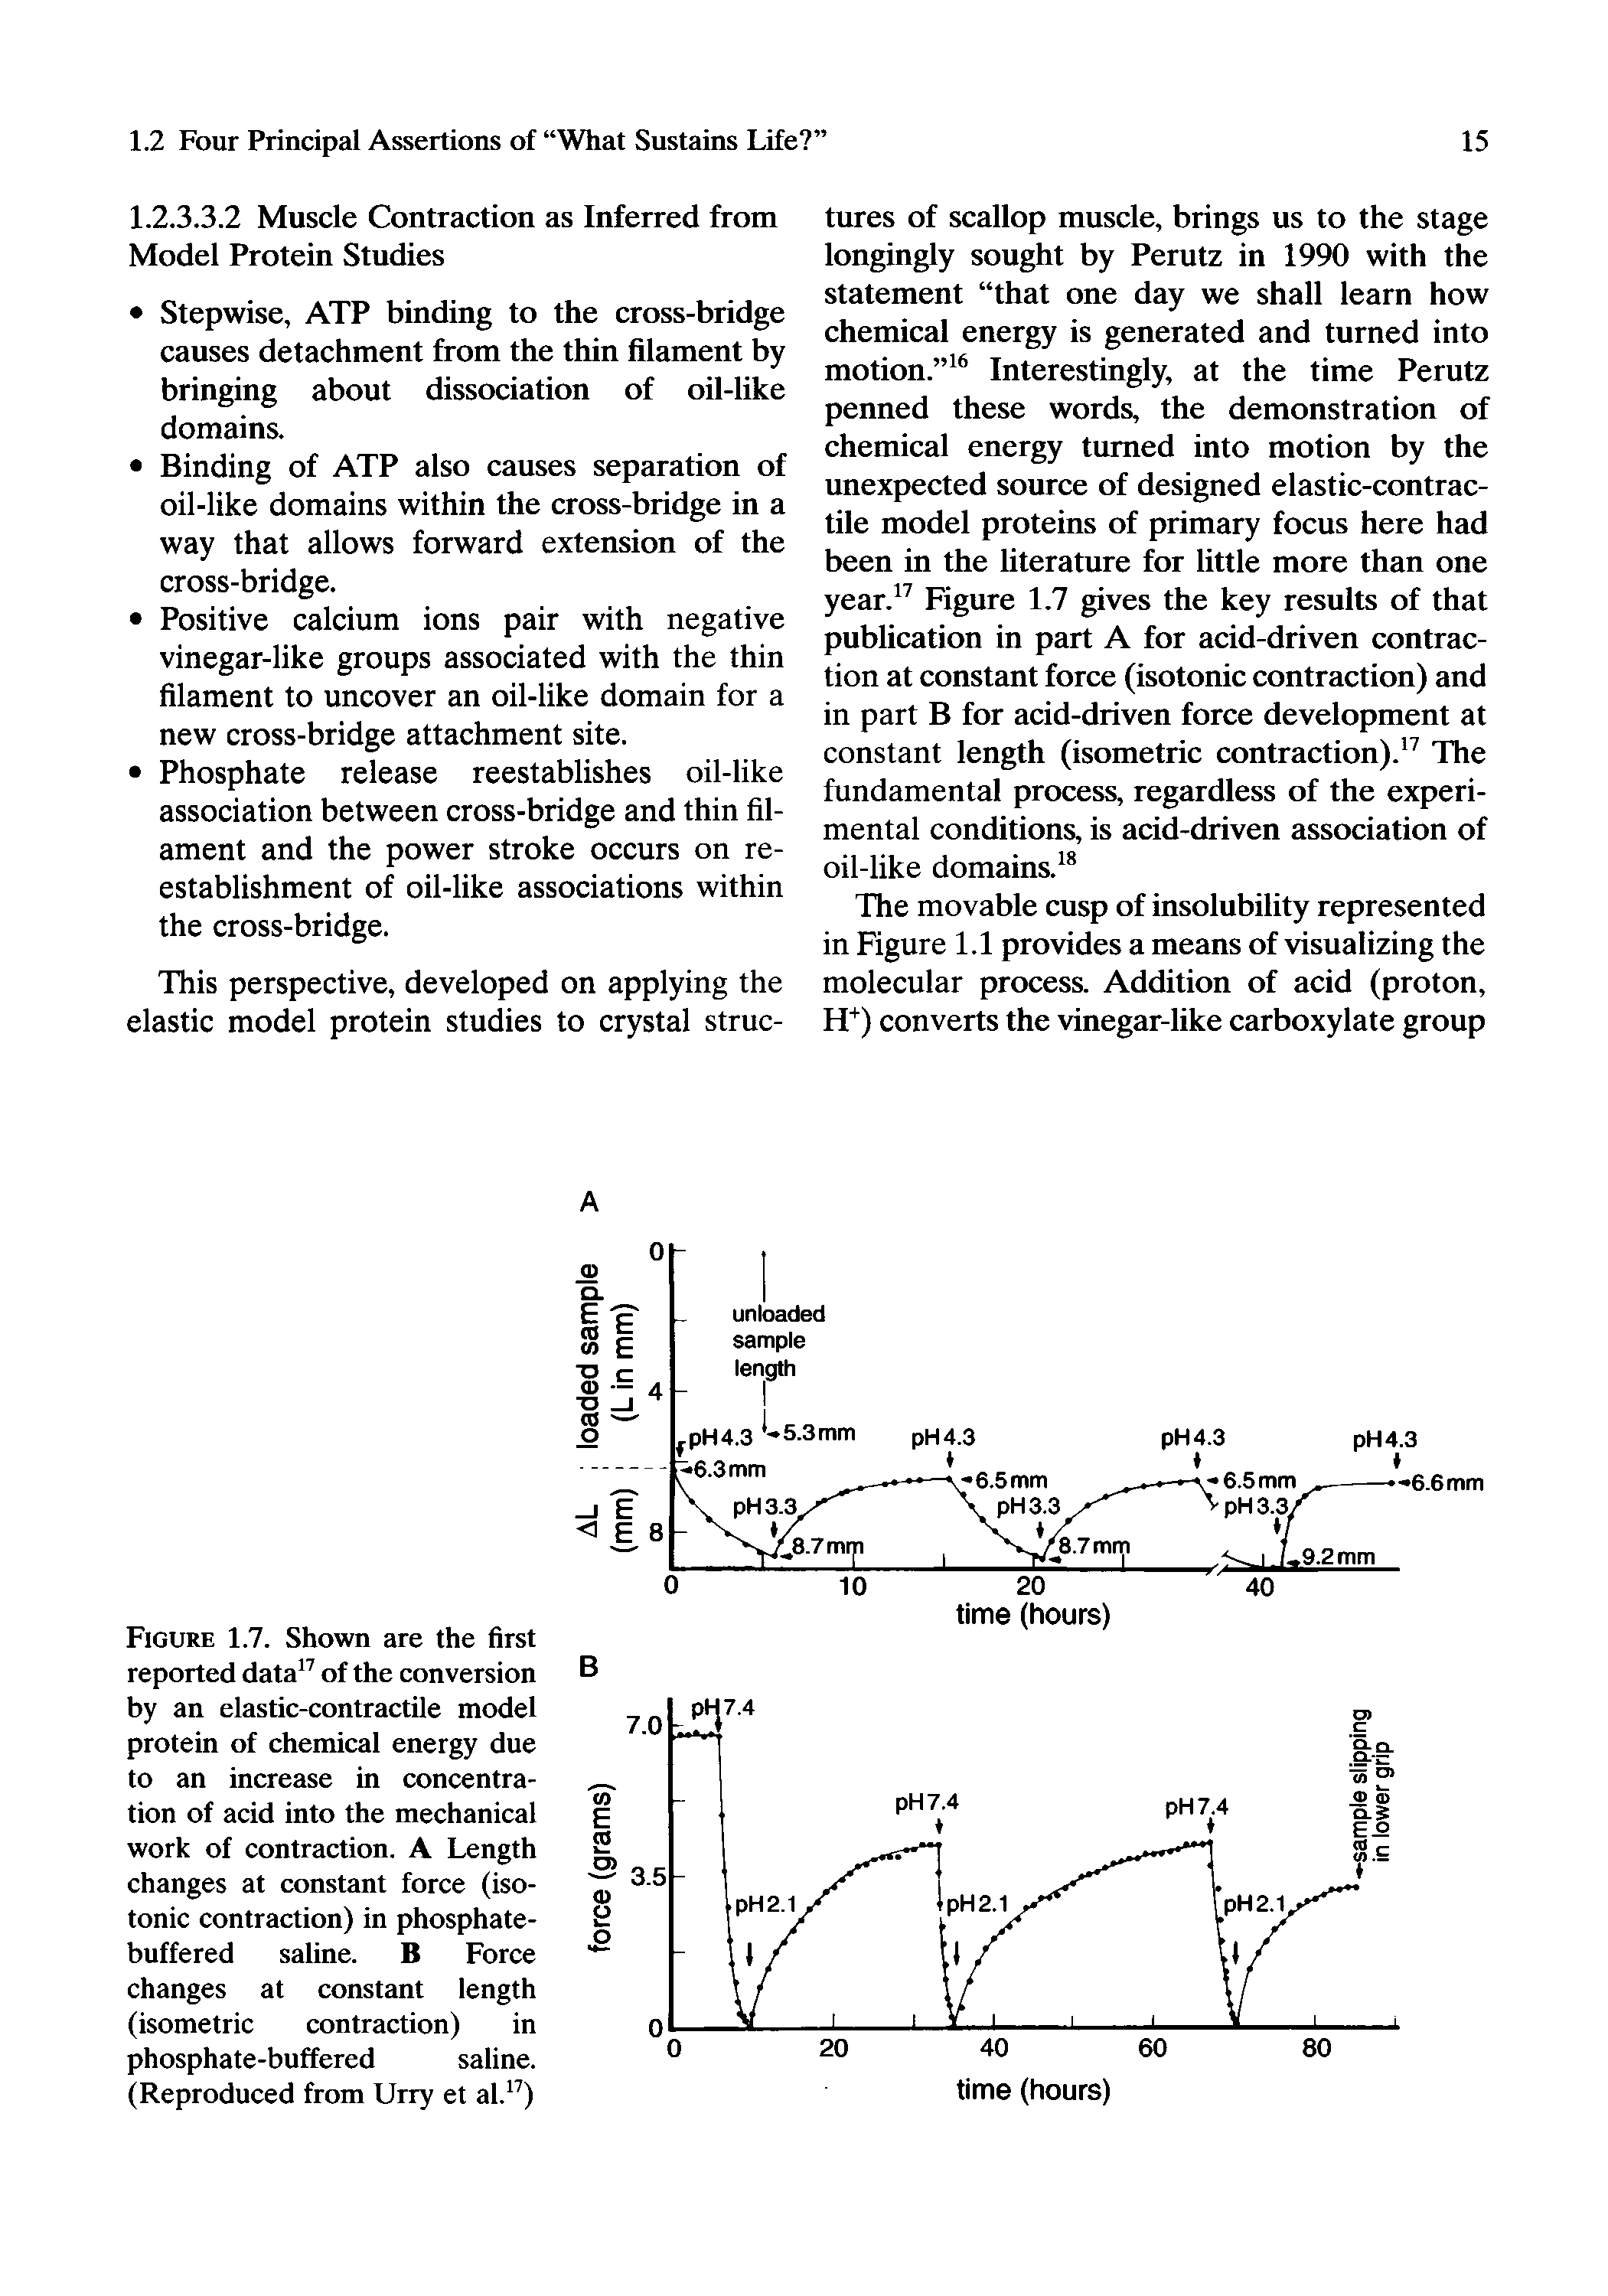 Figure 1.7. Shown are the first reported data of the conversion by an elastic-contractile model protein of chemical energy due to an increase in concentration of acid into the mechanical work of contraction. A Length changes at constant force (isotonic contraction) in phosphate-buffered saline. B Force changes at constant length (isometric contraction) in phosphate-buffered saline. (Reproduced from Urry et al. )...